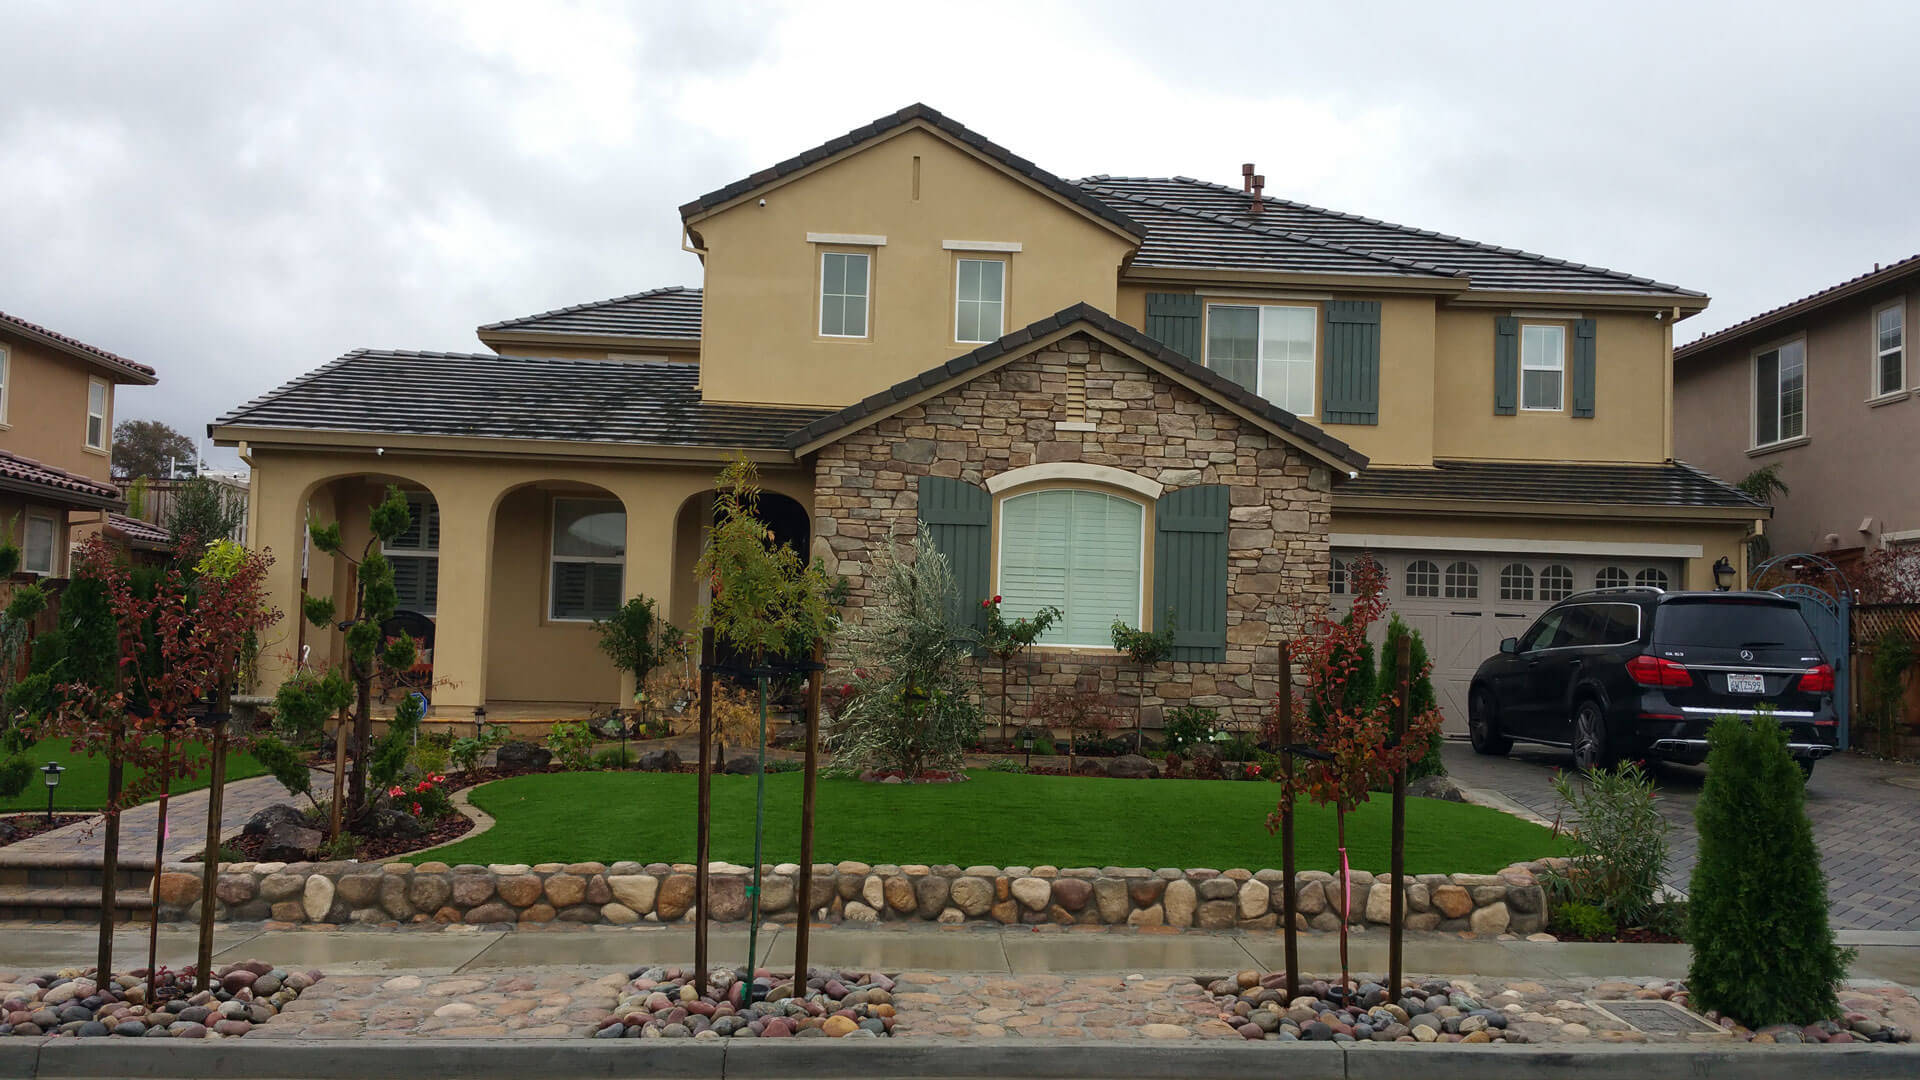 Gilroy Landscaping Company, Concrete Contractor and Landscaper